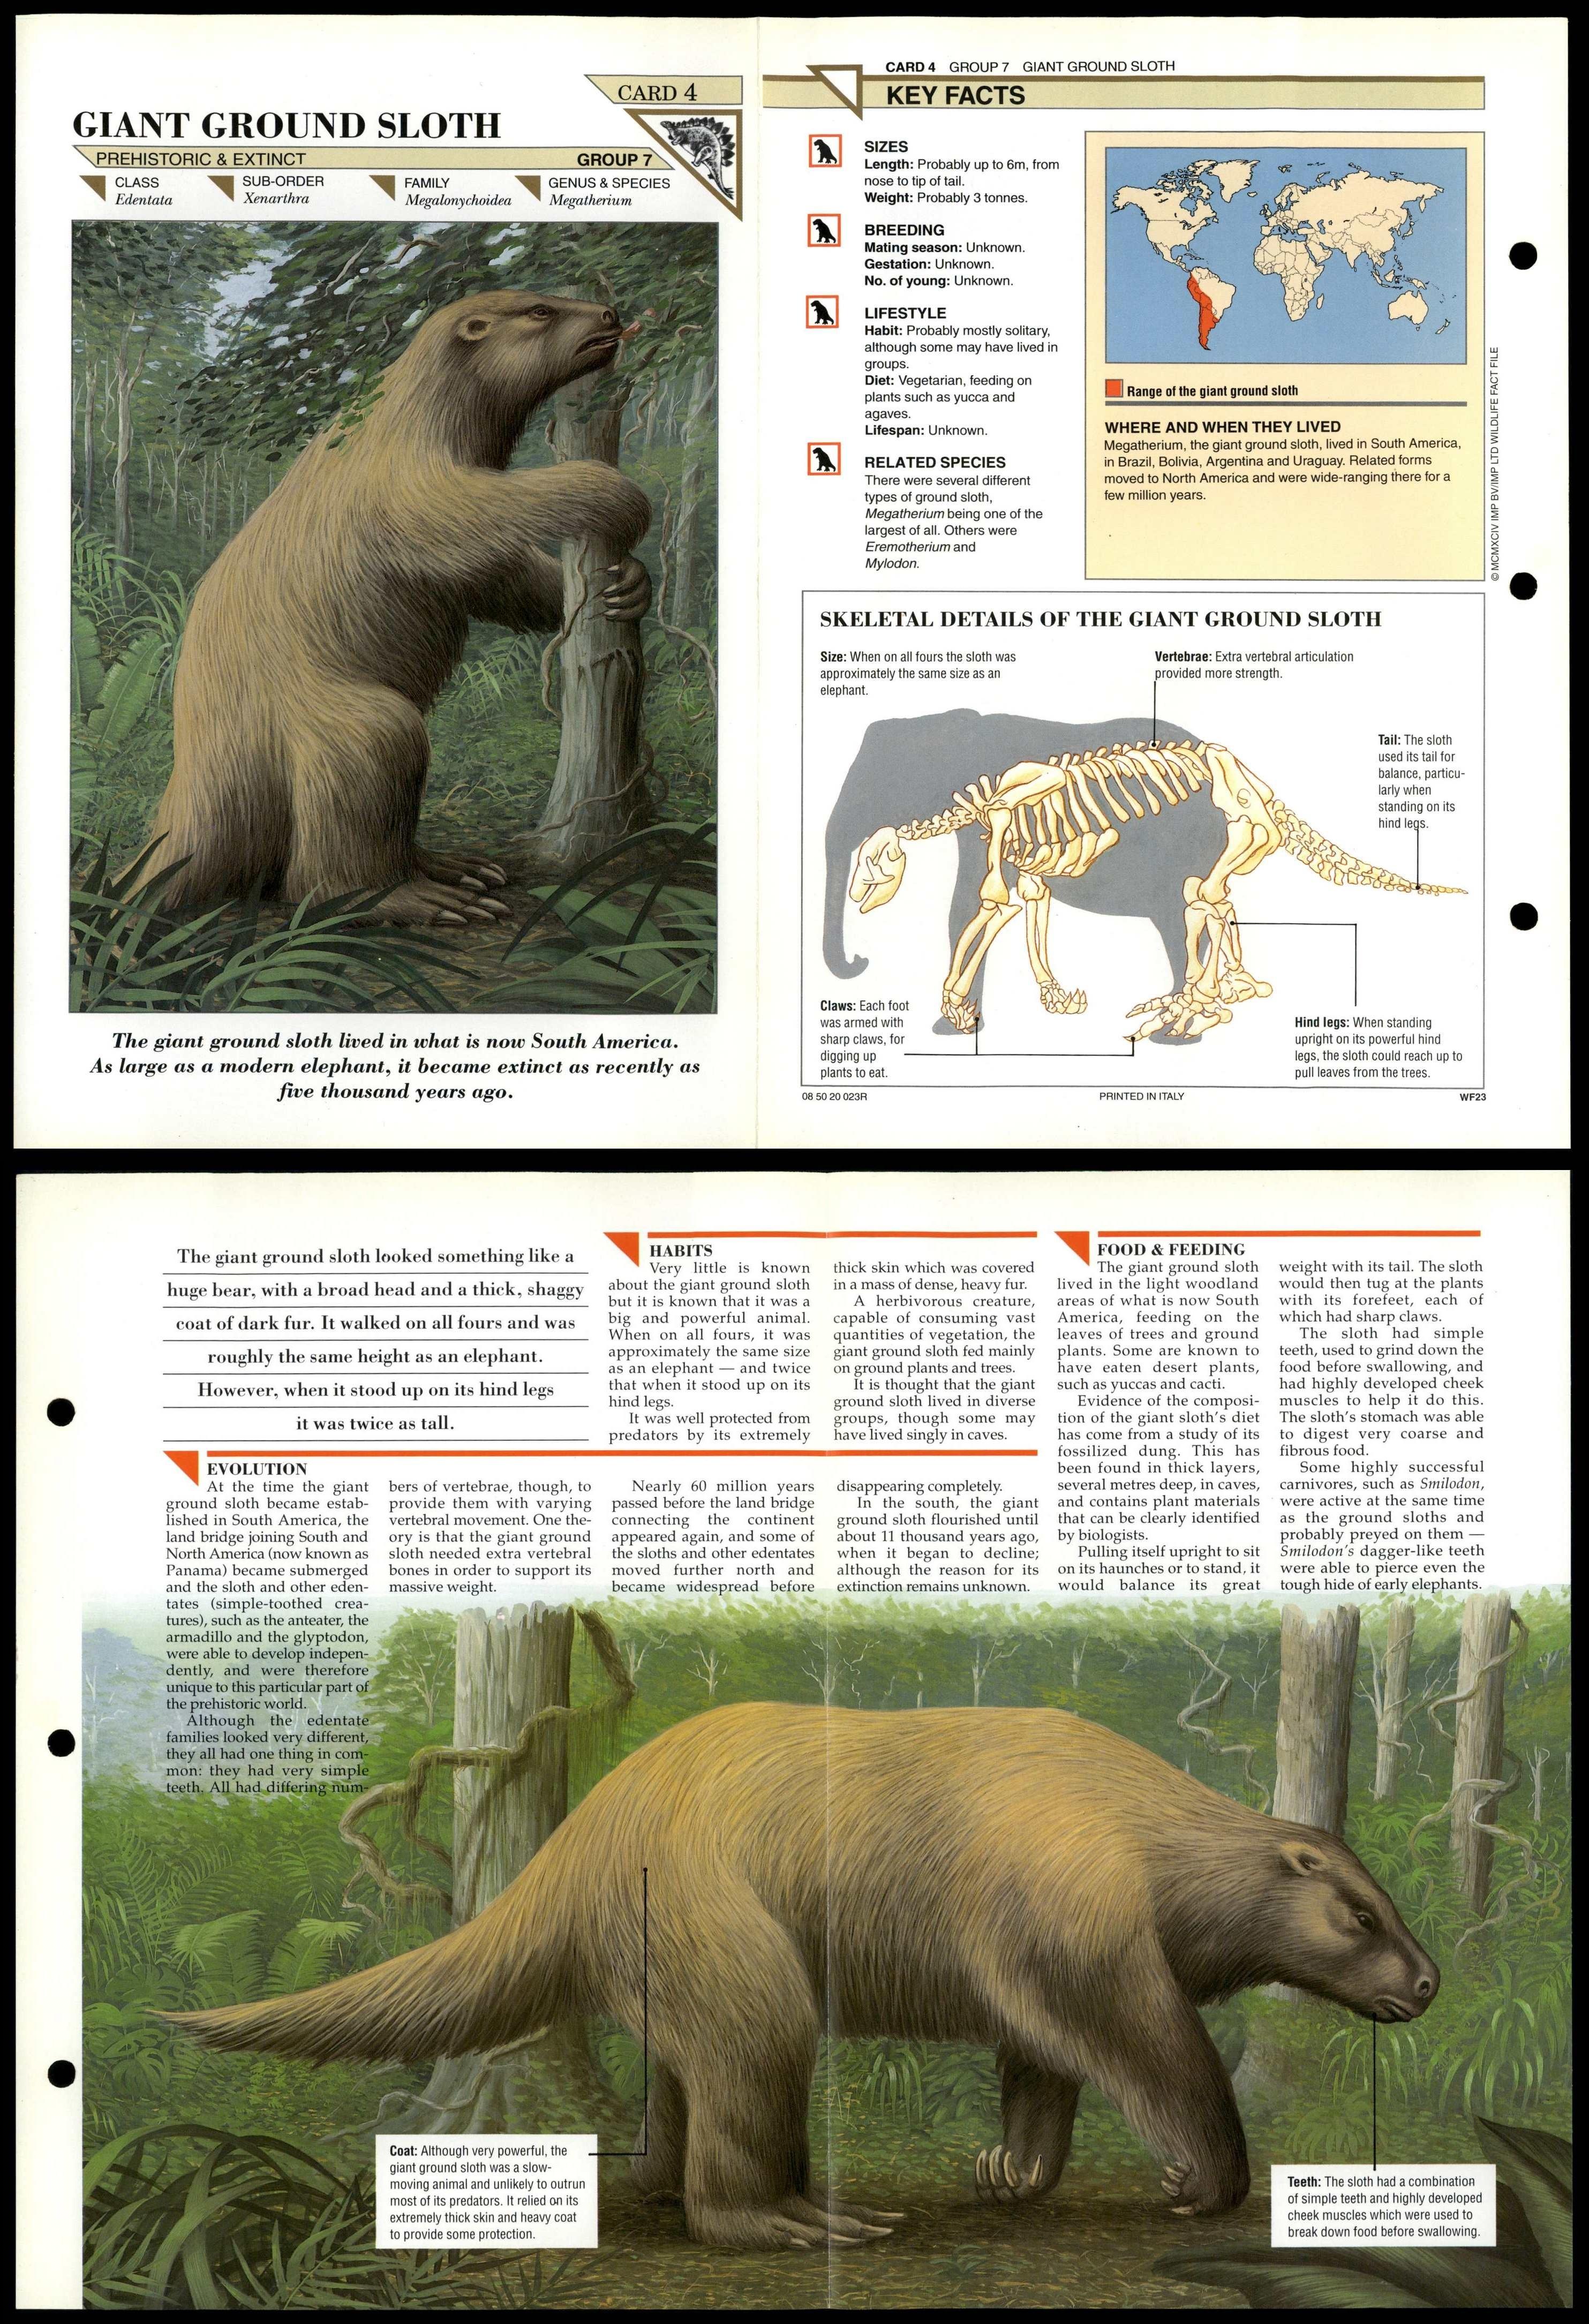 Giant Ground Sloth #4 Extinct Wildlife Fact File Fold-Out Card